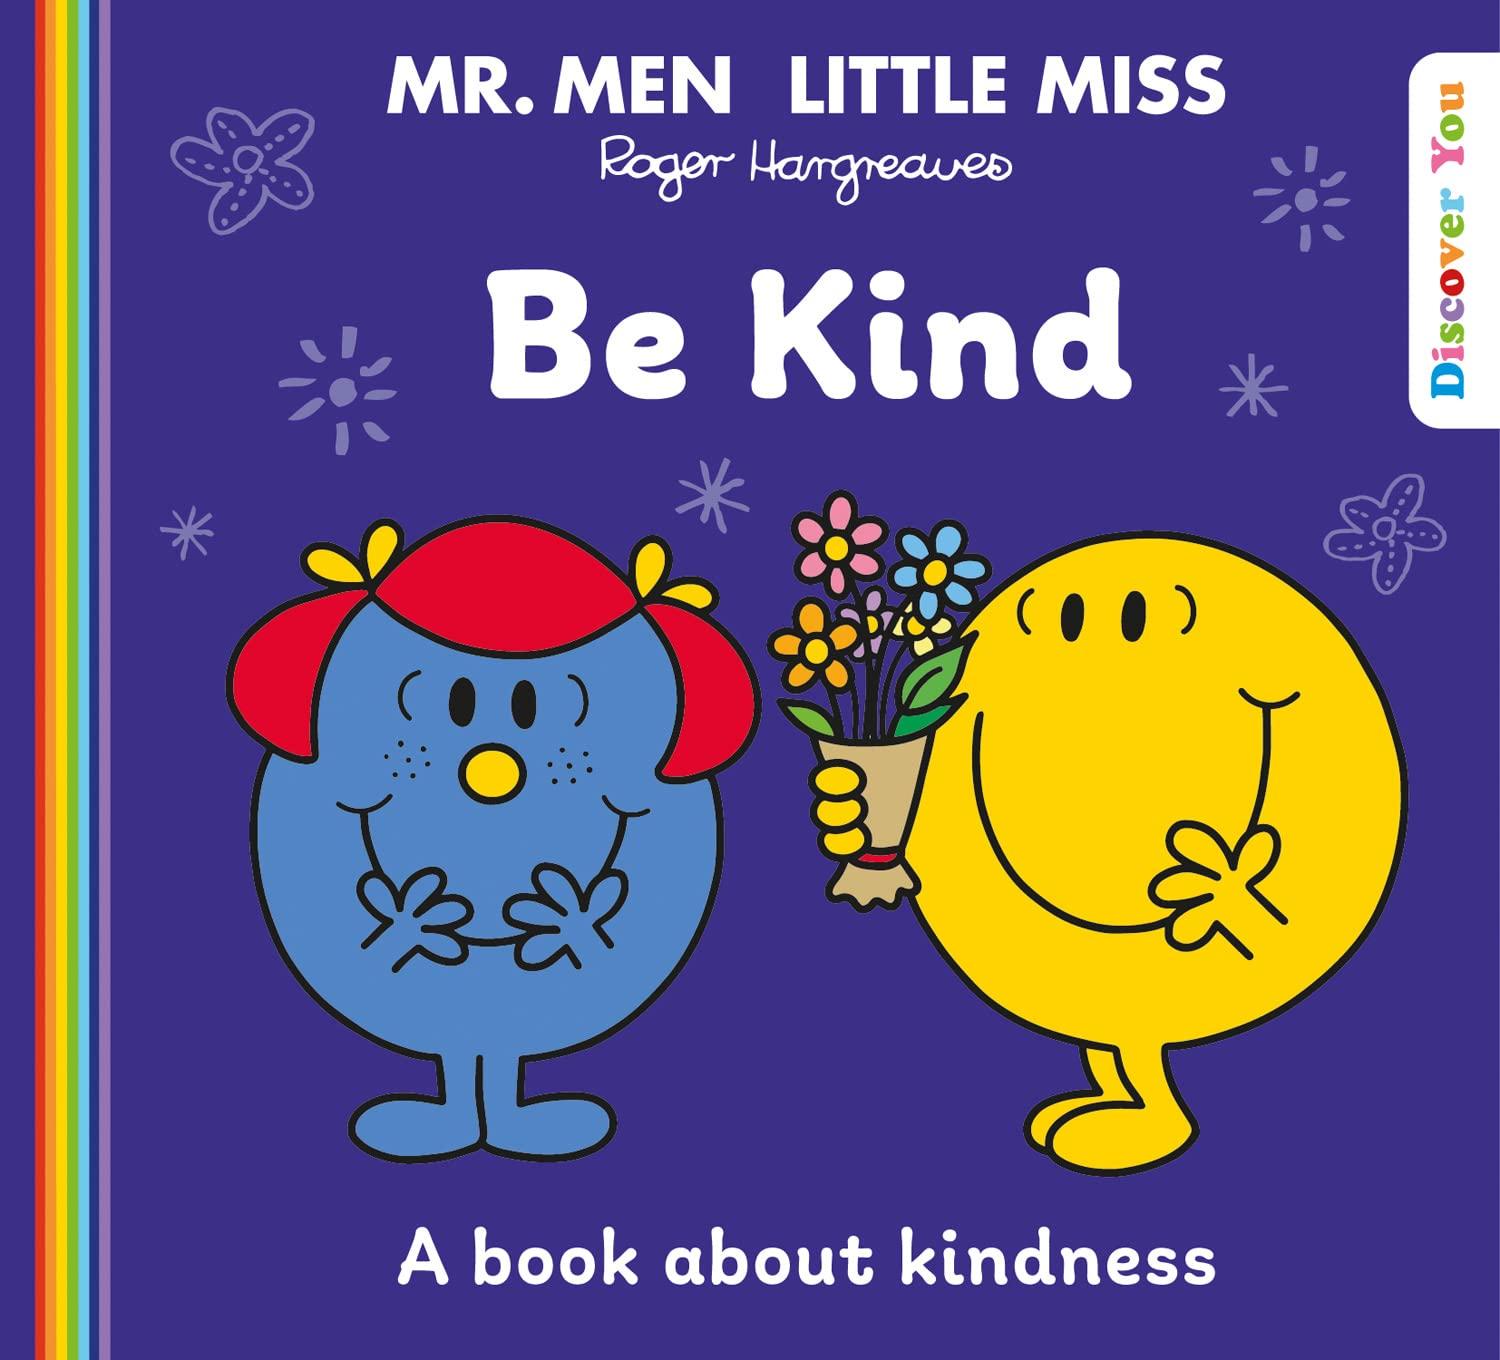 Truyện đọc thiếu nhi  tiếng Anh: Mr. Men and Little Miss Discover You — MR. MEN LITTLE MISS: BE KIND